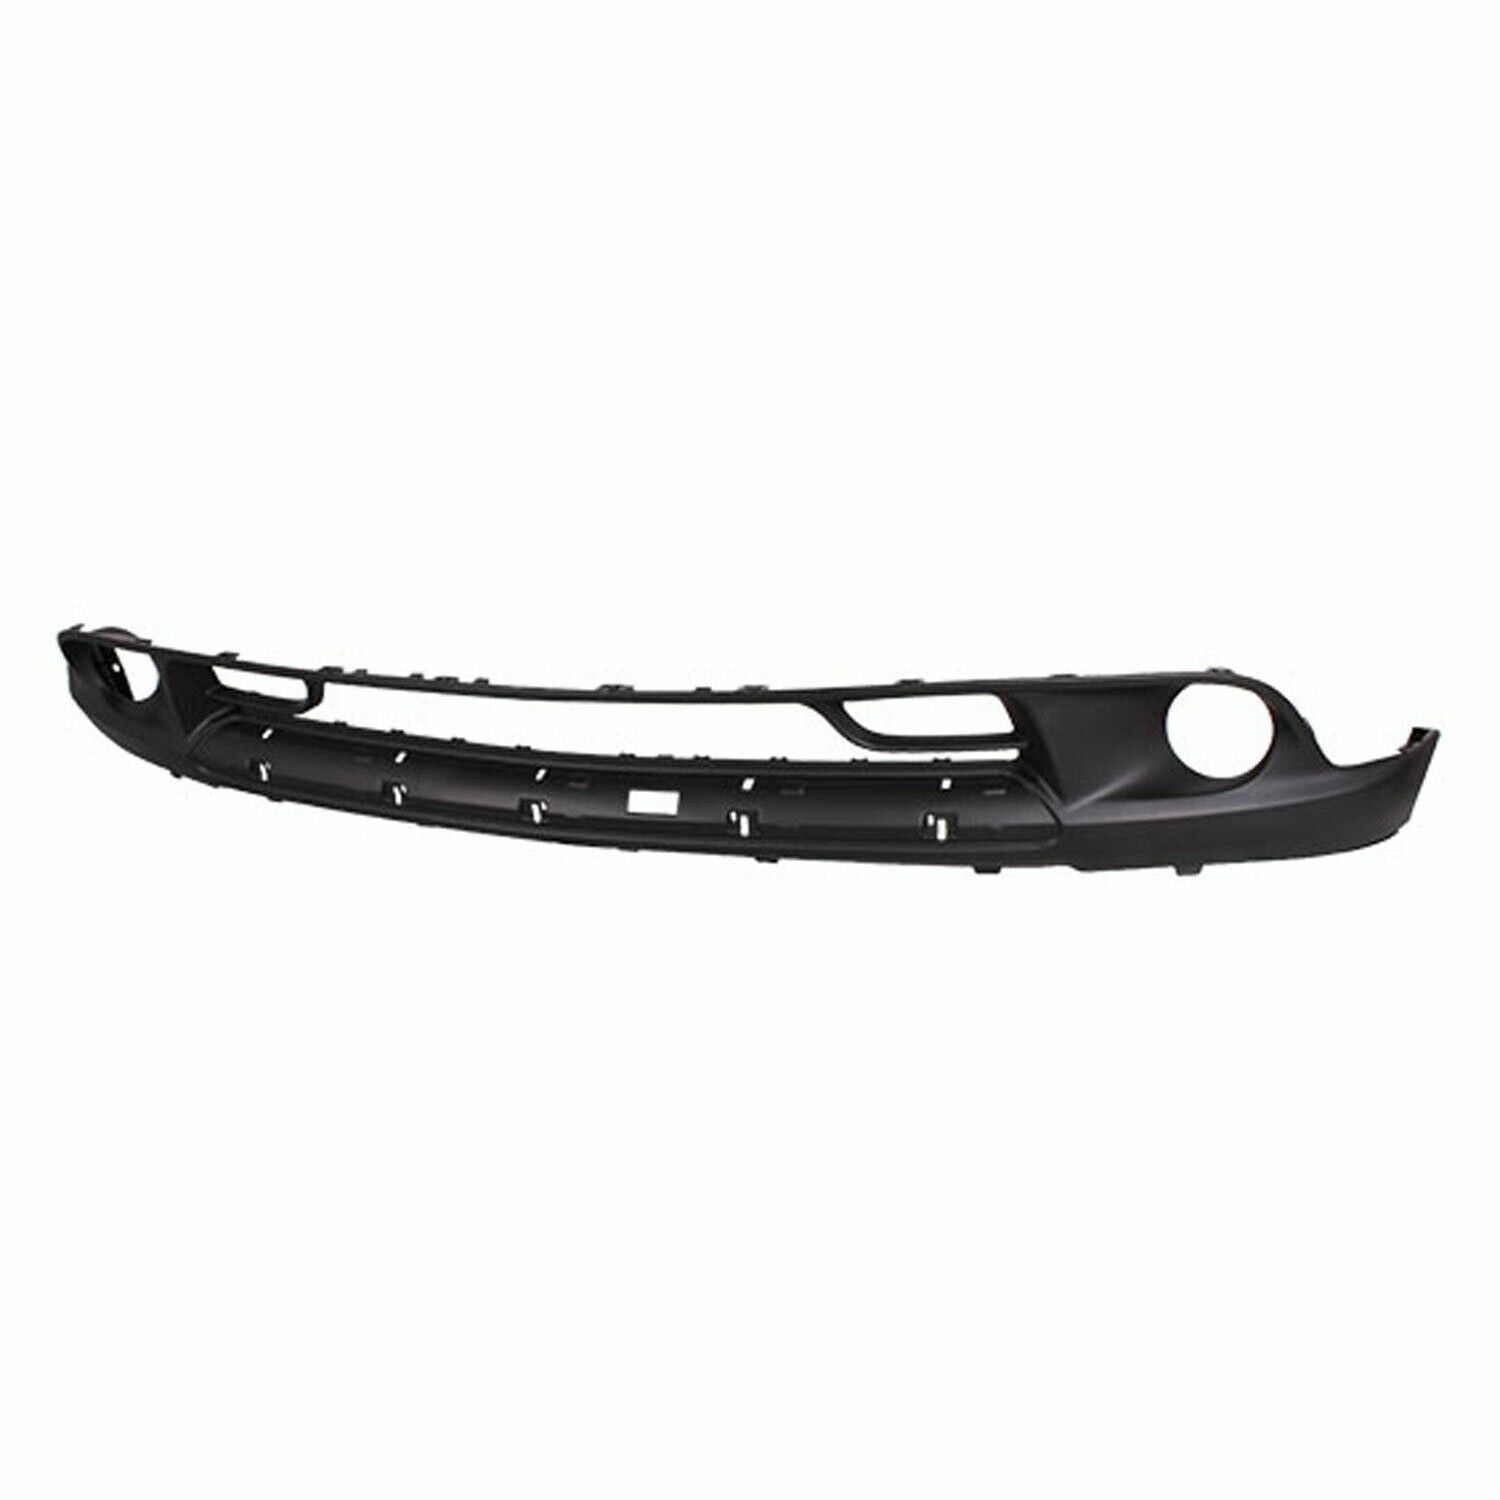 2011-2013 DODGE DURANGO; Front Bumper Cover; Lower Painted to Match